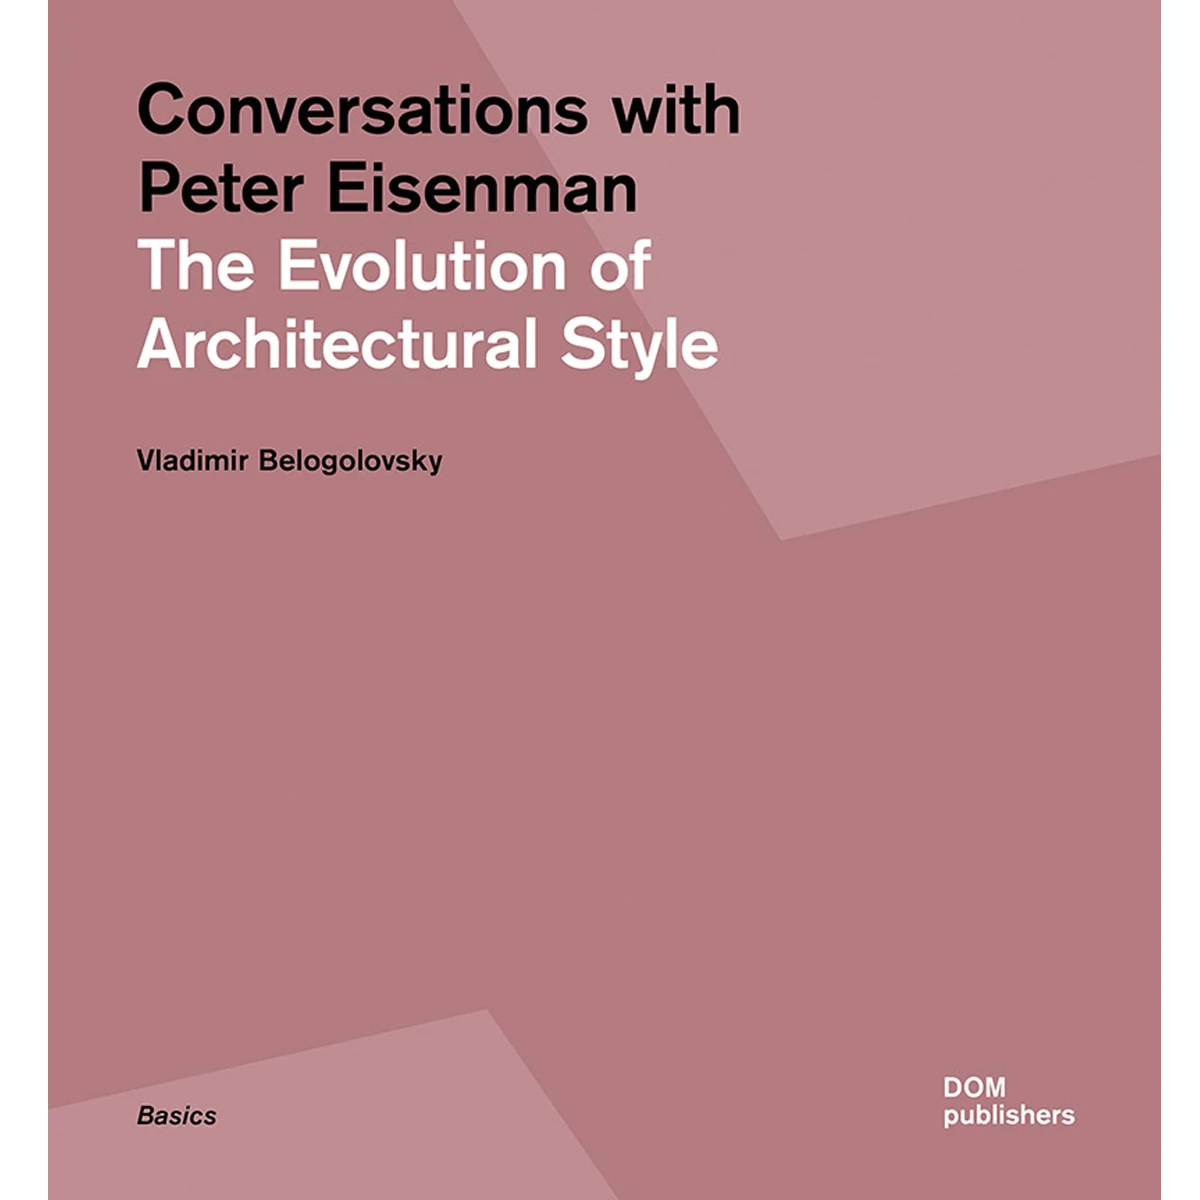 Conversations with Peter Eisenman